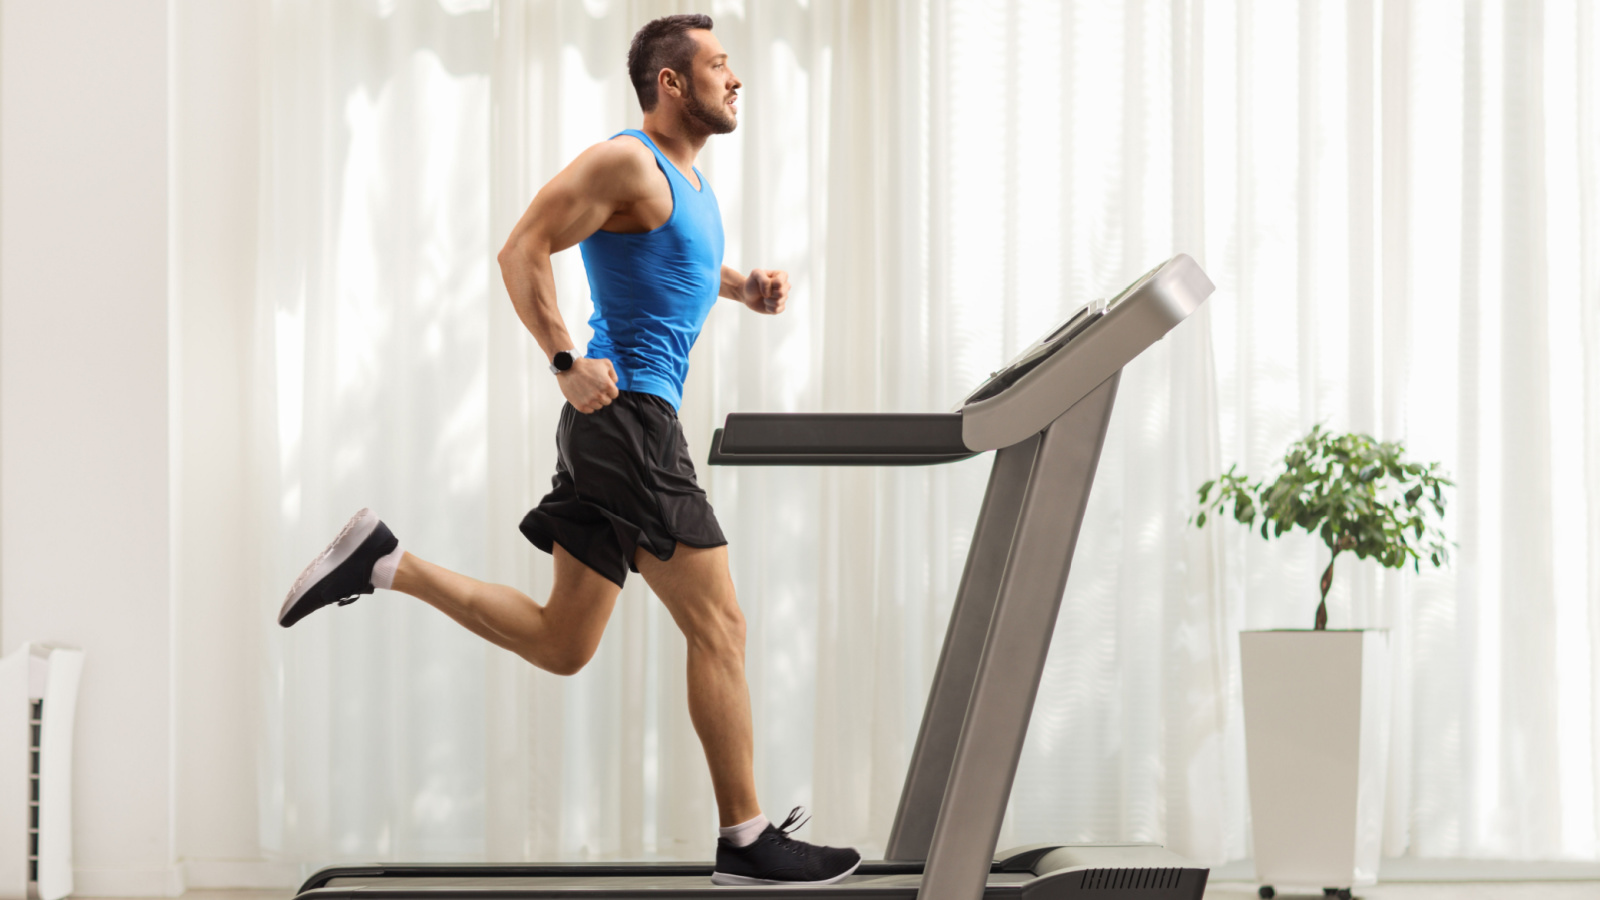 image credit: Ljupco Smokovski/Shutterstock <p><span>When your performance in workouts starts to deteriorate instead of improve, it’s a clear sign of overtraining. Your muscles are too fatigued to perform properly, leading to decreased strength and stamina. Taking a few days off can sometimes be the best way to jumpstart your progress again.</span></p>